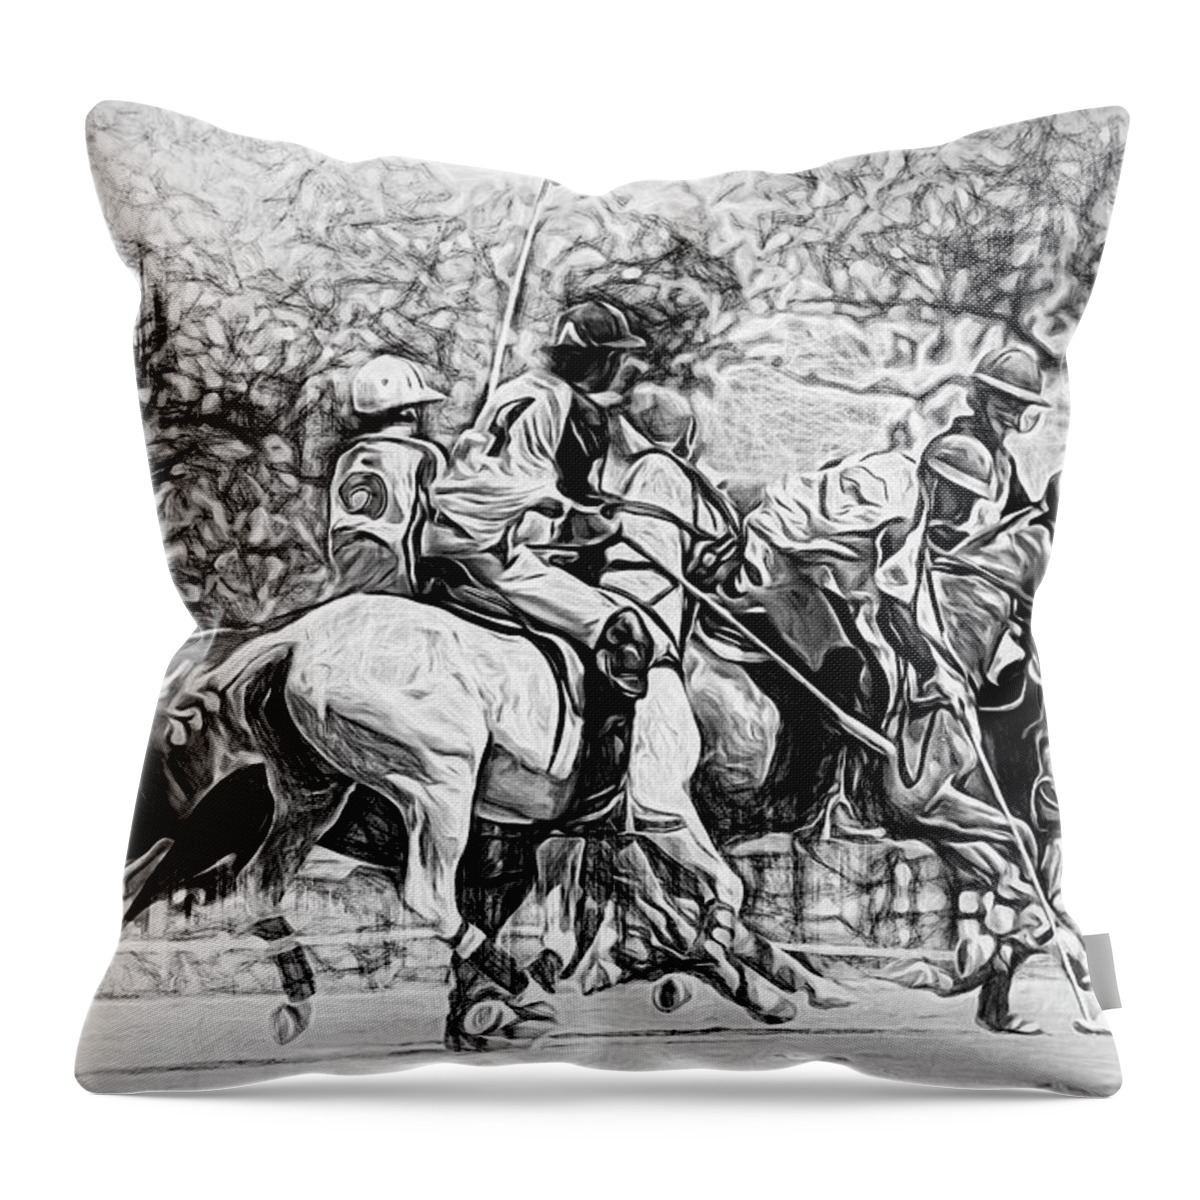 Alicegipsonphotographs Throw Pillow featuring the photograph Black And White Polo Hustle by Alice Gipson